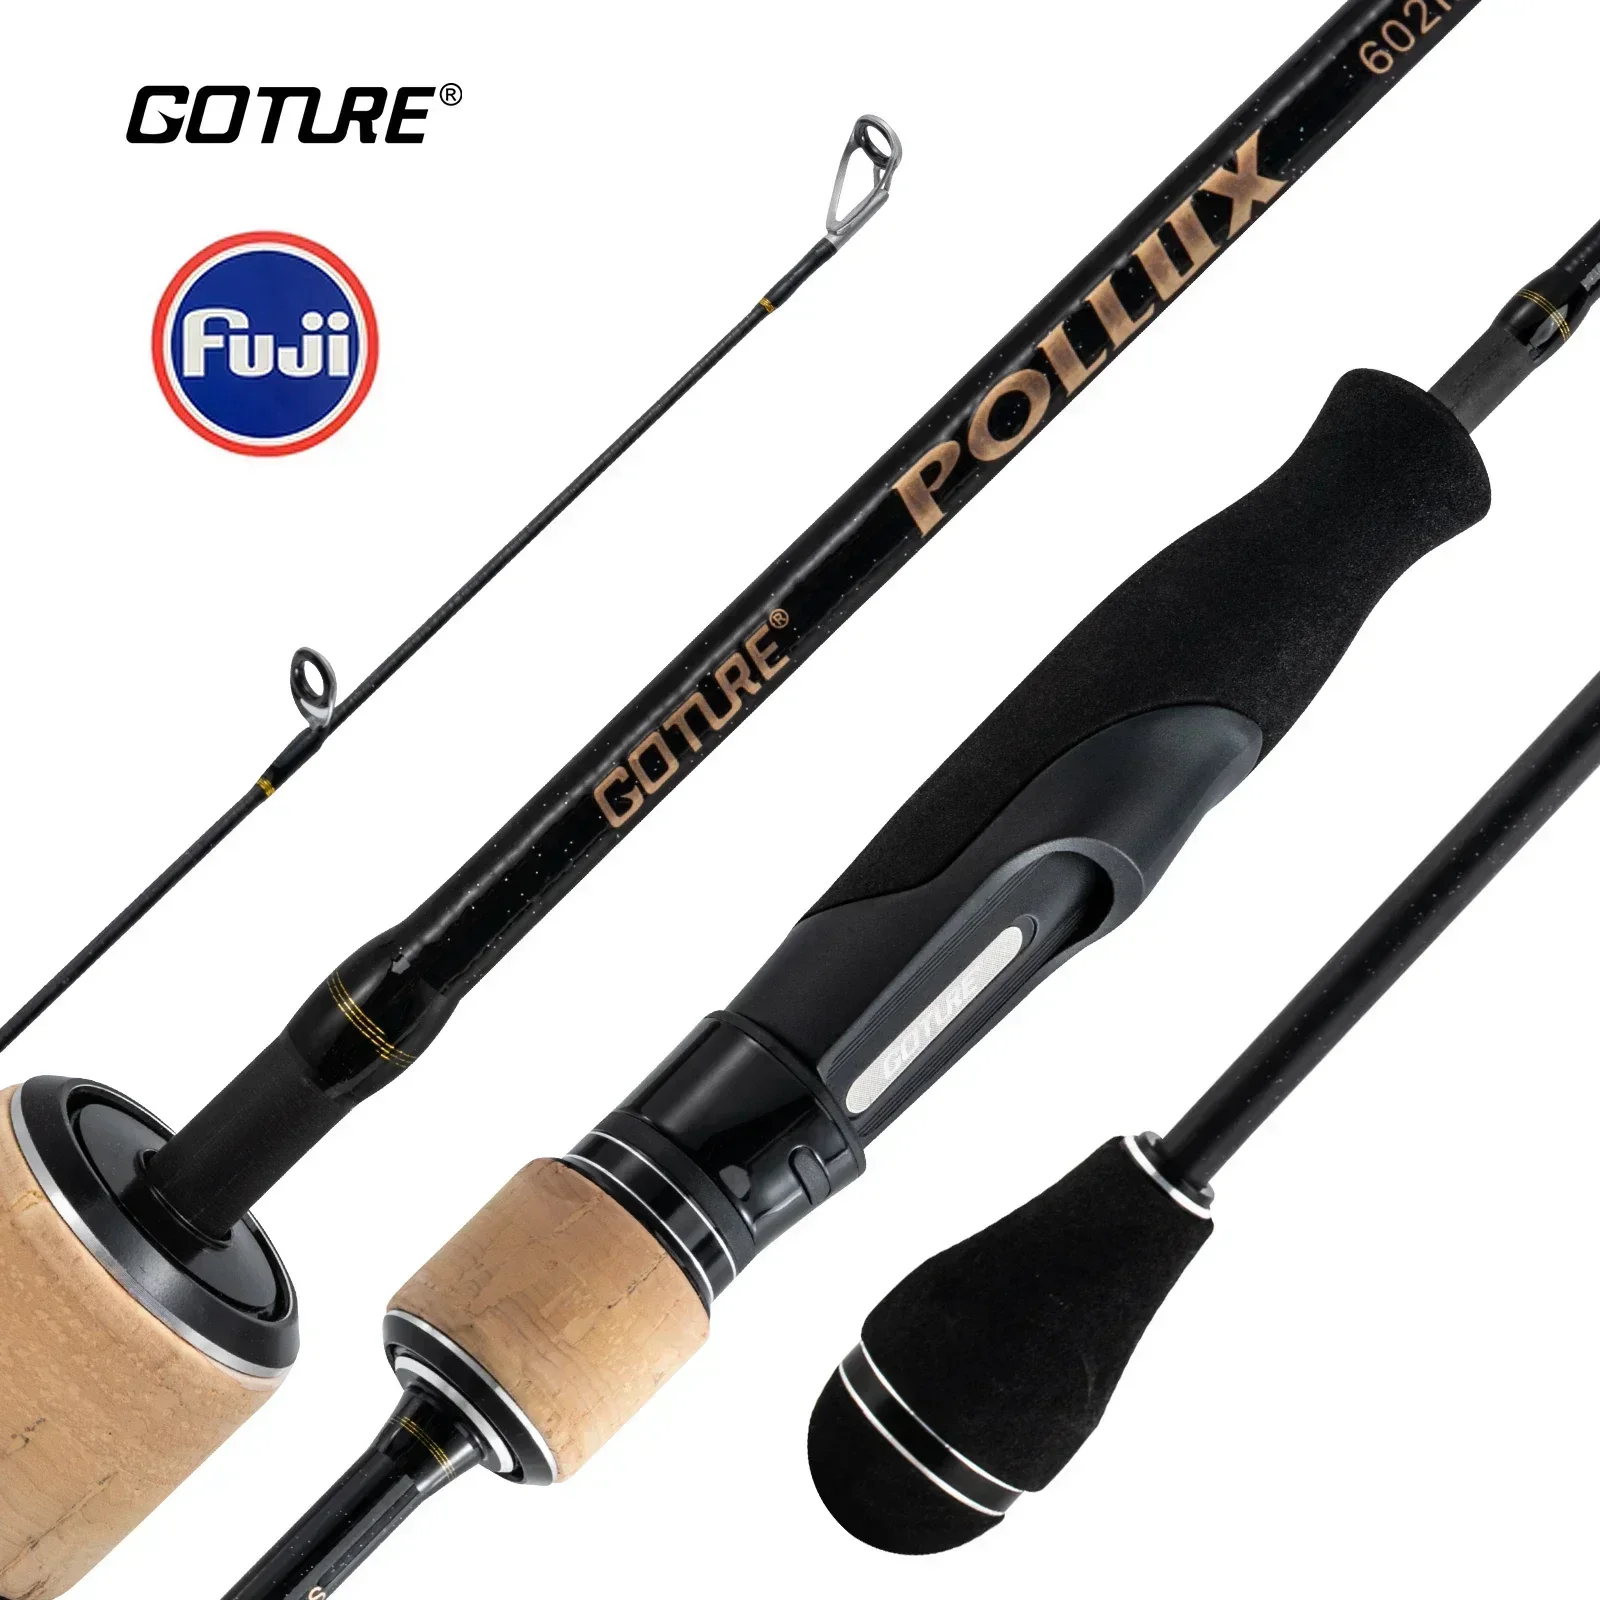 

Goture Pollux Slow Fast Boat Rod 100%Fuji Guide Ring Jigging Fishing Rod 1.83m 1.98m Spinning/Casting ML M MH Action Sea pole